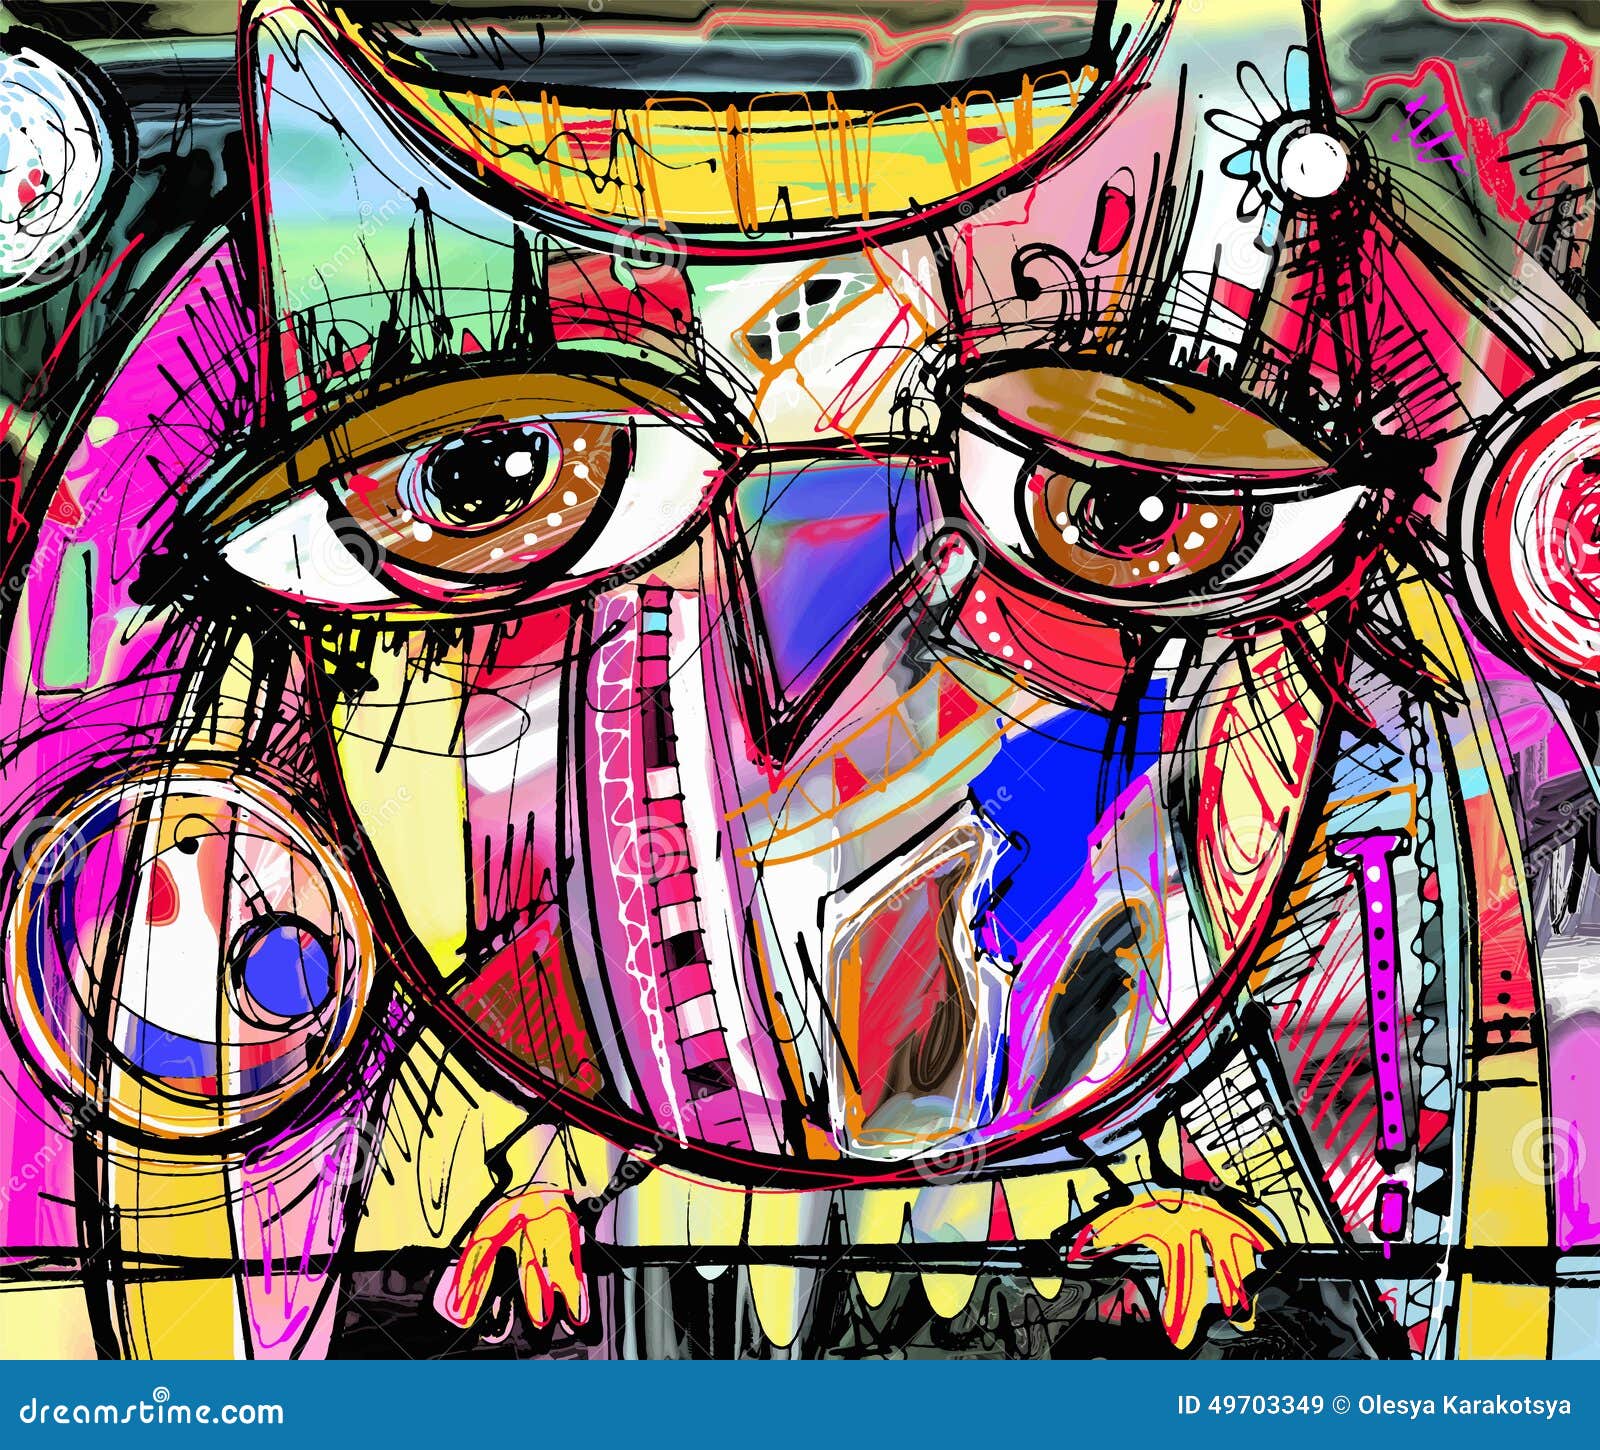 abstract digital painting artwork of doodle owl